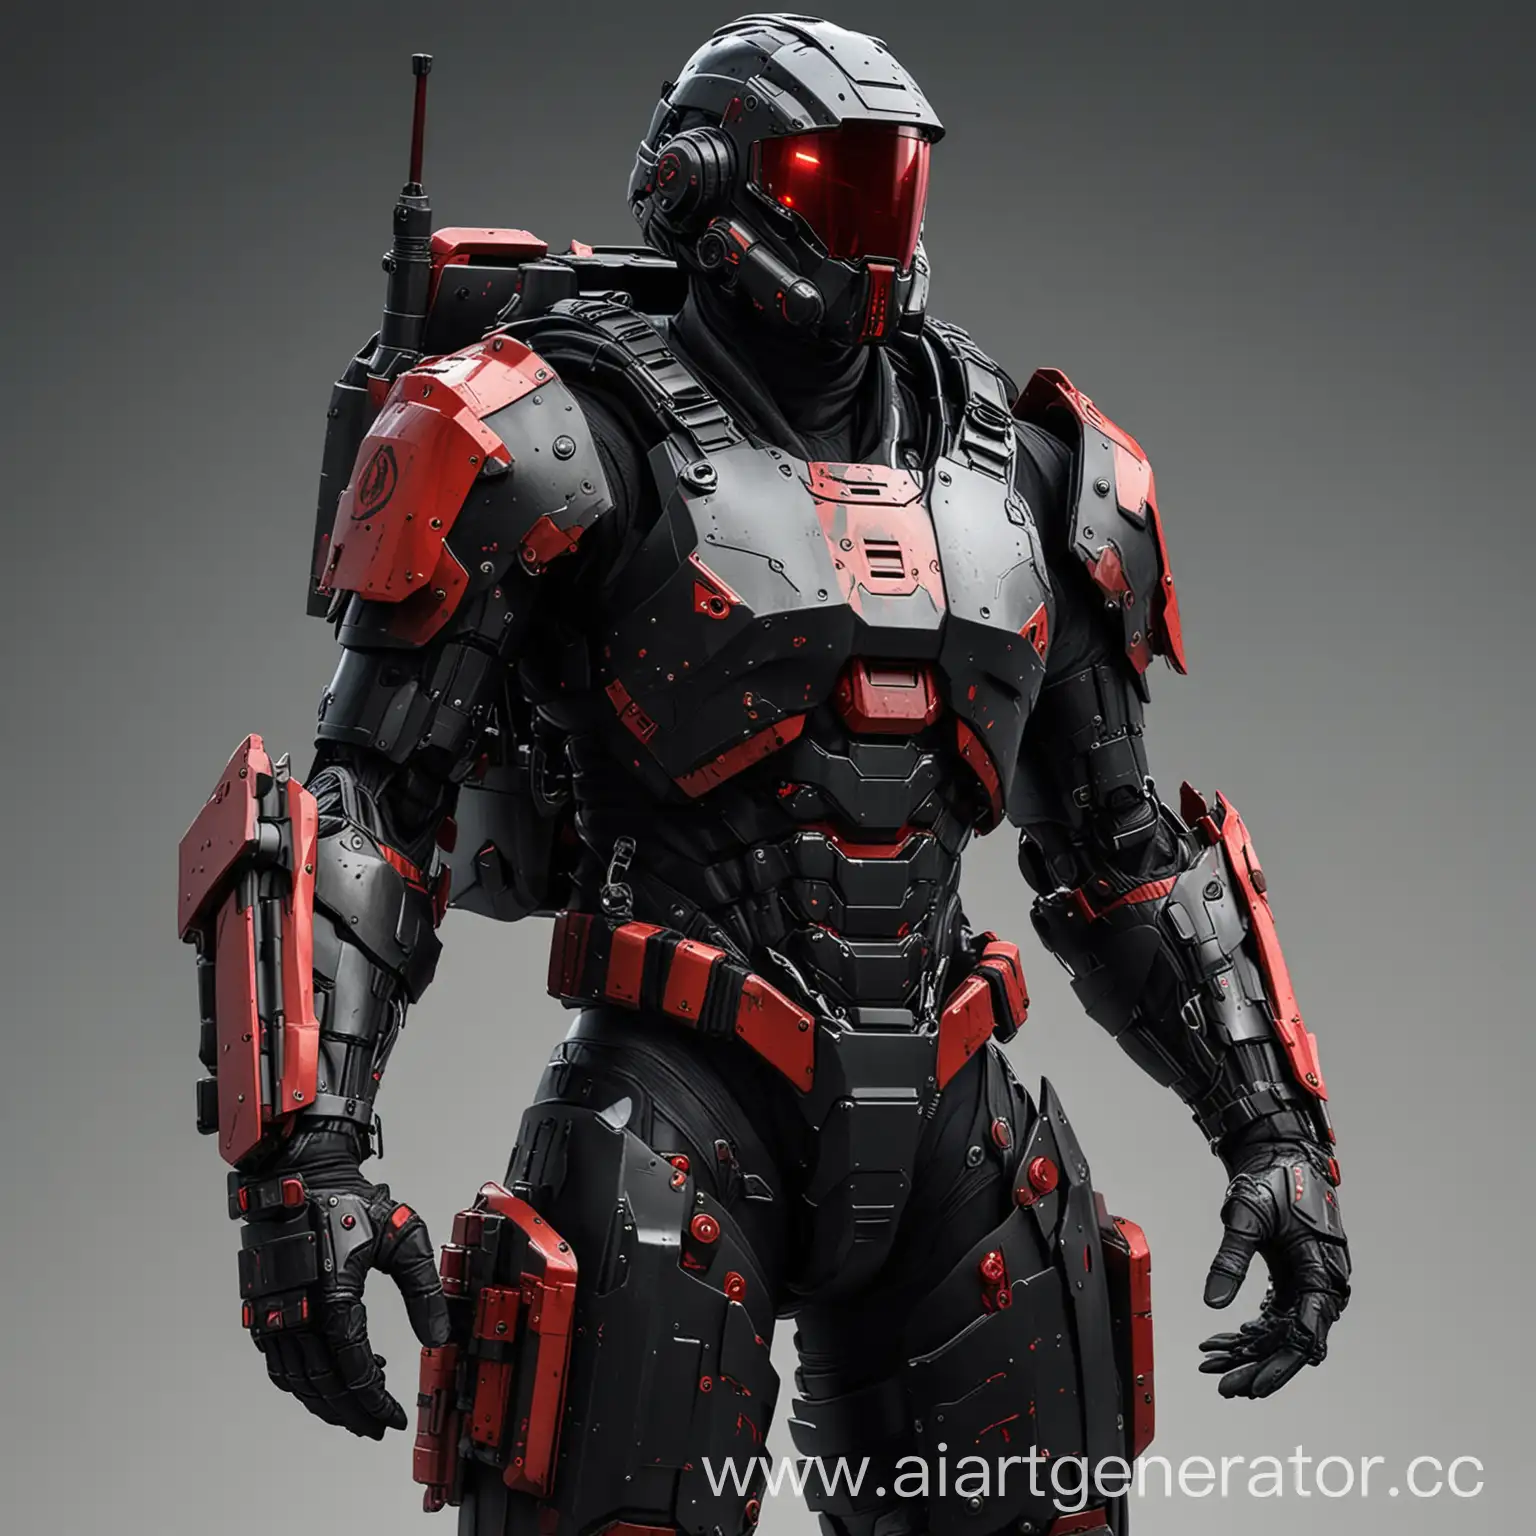 A soldier in a massive black heavy high-tech armored suit with red elements on in full height. There is a large black steel square backpack on his back. He wears a black helmet with a red glass visor. The arms are protected by black armor plates, and there are massive inserts on the shoulders, sci-fi concept art